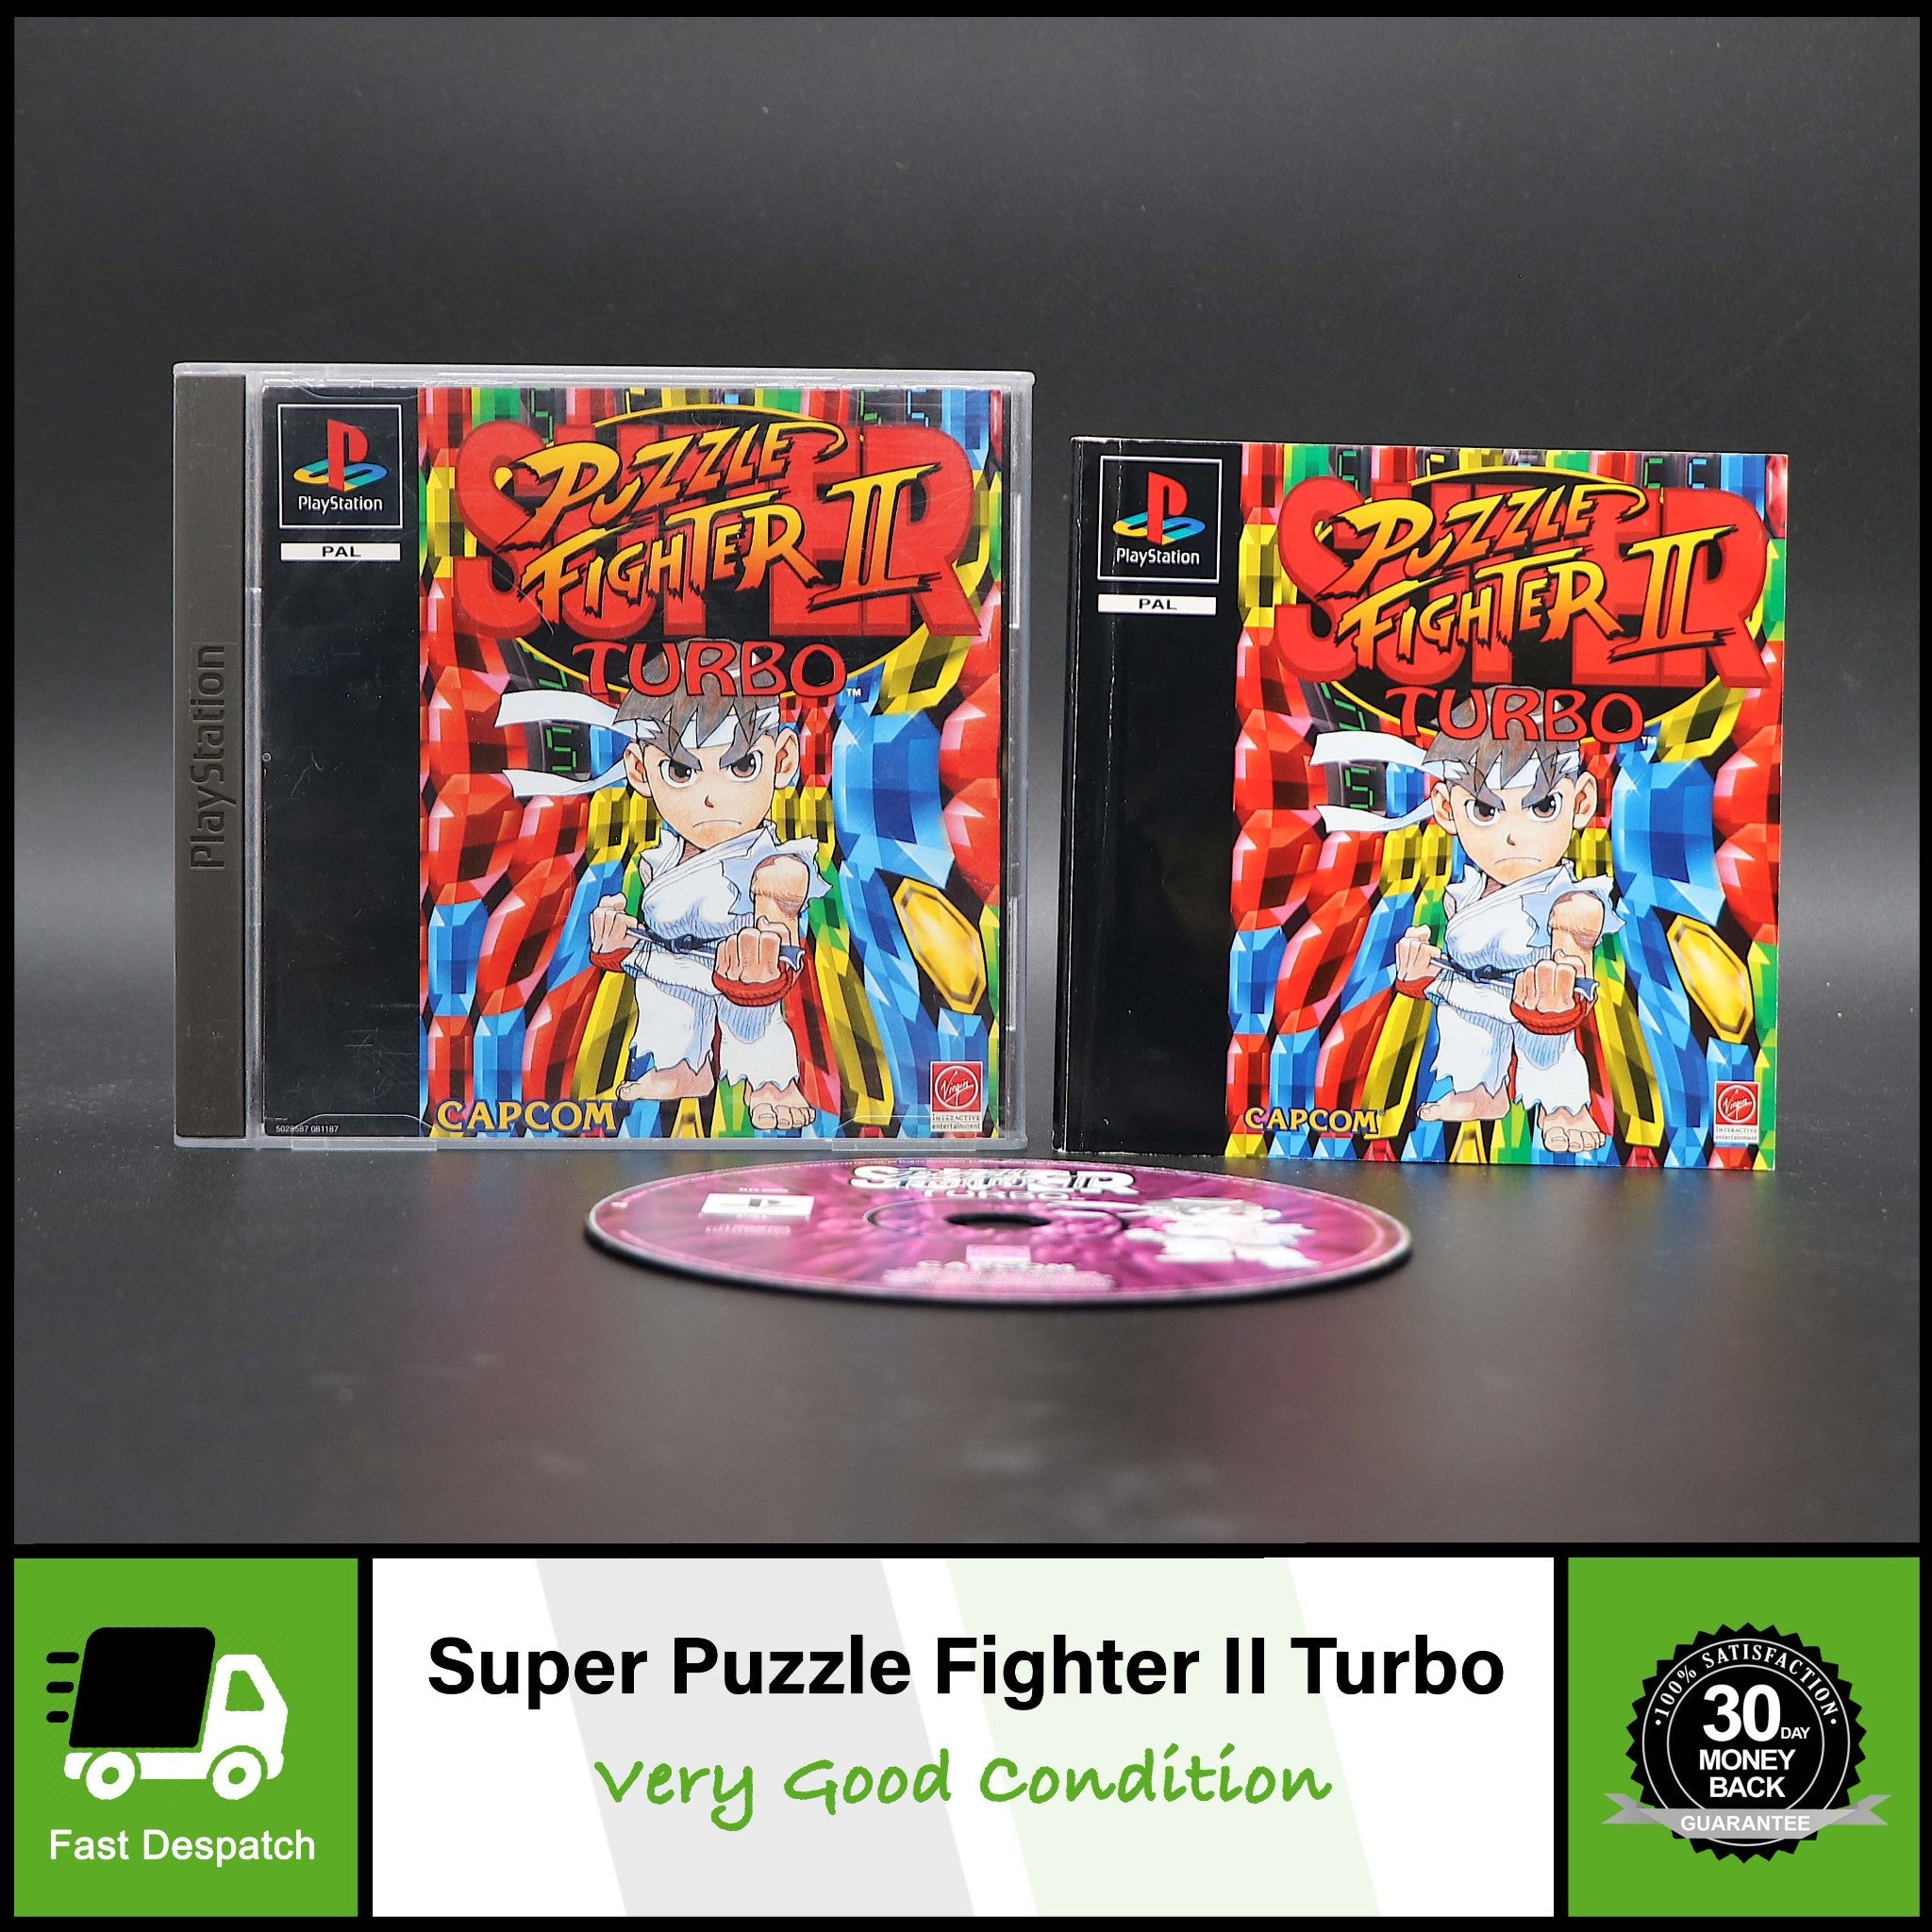 Super Puzzle Fighter II Turbo | Sony PSONE PS1 Game | Very Good Condition